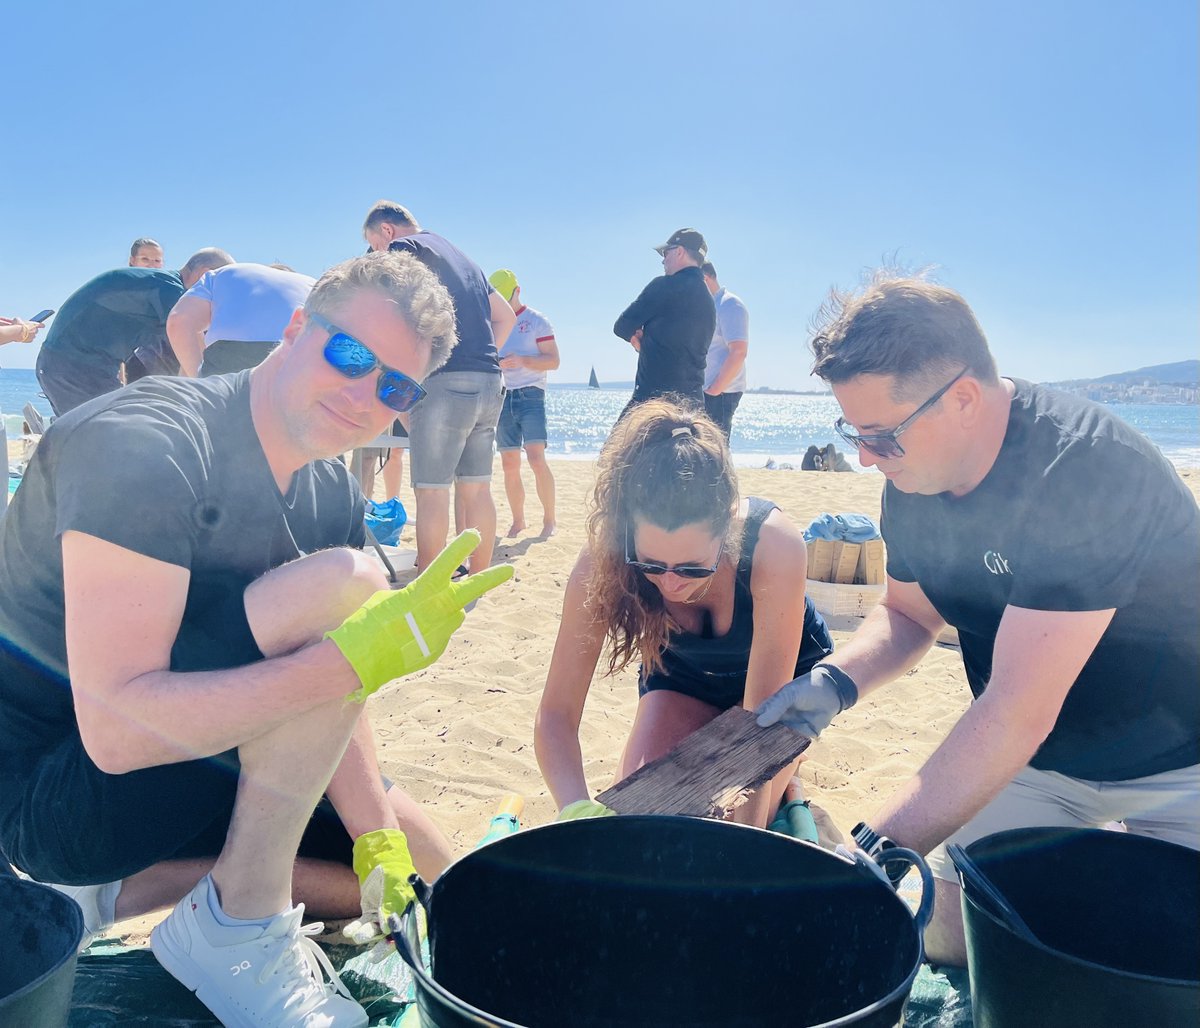 Proud to say that at @Qlik, corporate responsibility runs deep in our DNA. We're committed to giving back and making a difference. Recently, at our EMEA Partner Advisory Council event, we partnered with Cleanwave.org for a Beach Clean-up. #EarthDay #ESG #EarthWeek